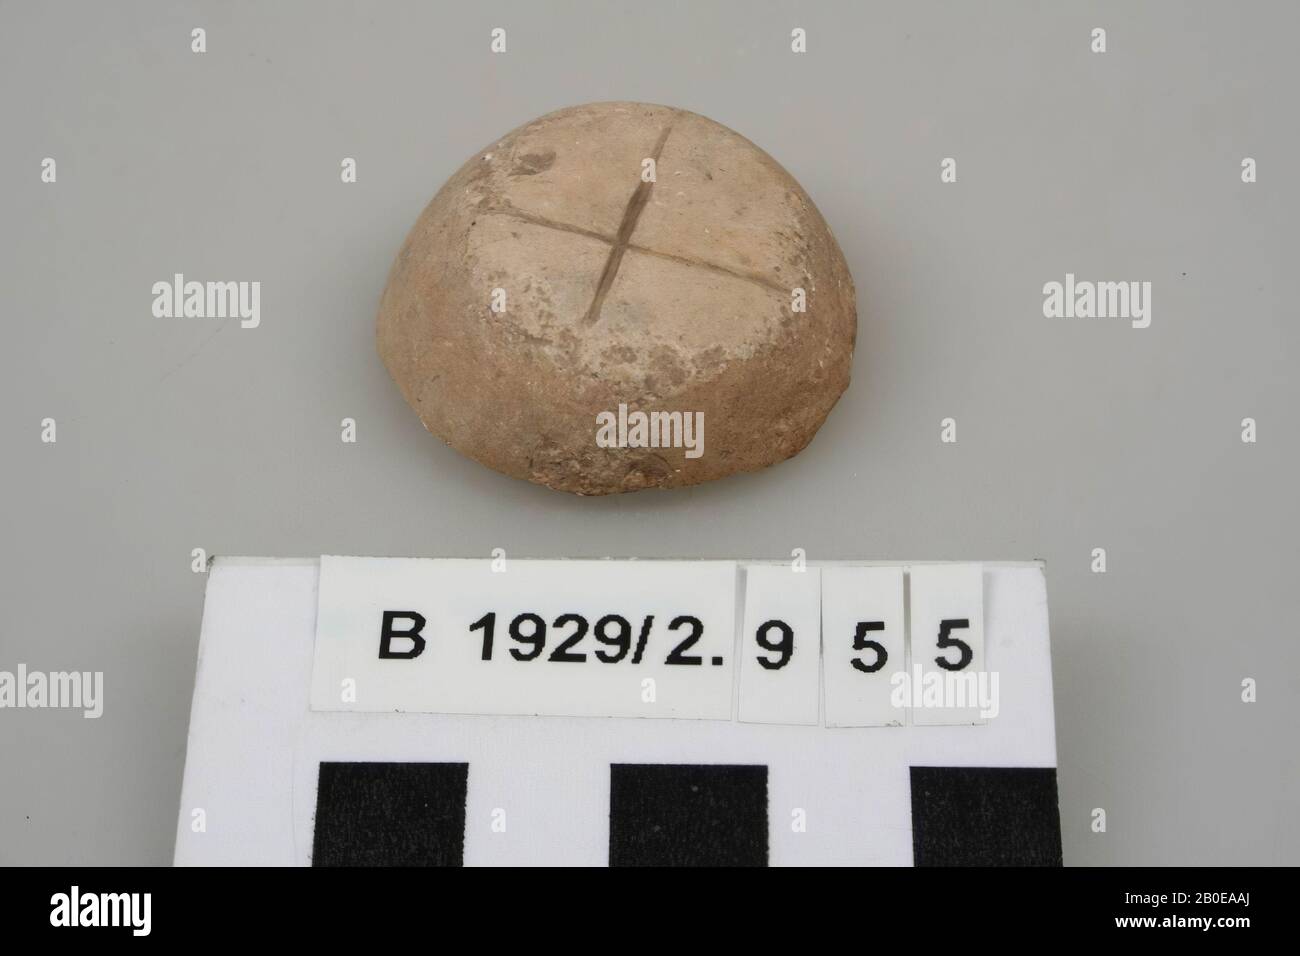 A flattened conical stone, in which two lines are scratched on one side, toys, stone, limestone, D 4 cm, Palestine Stock Photo